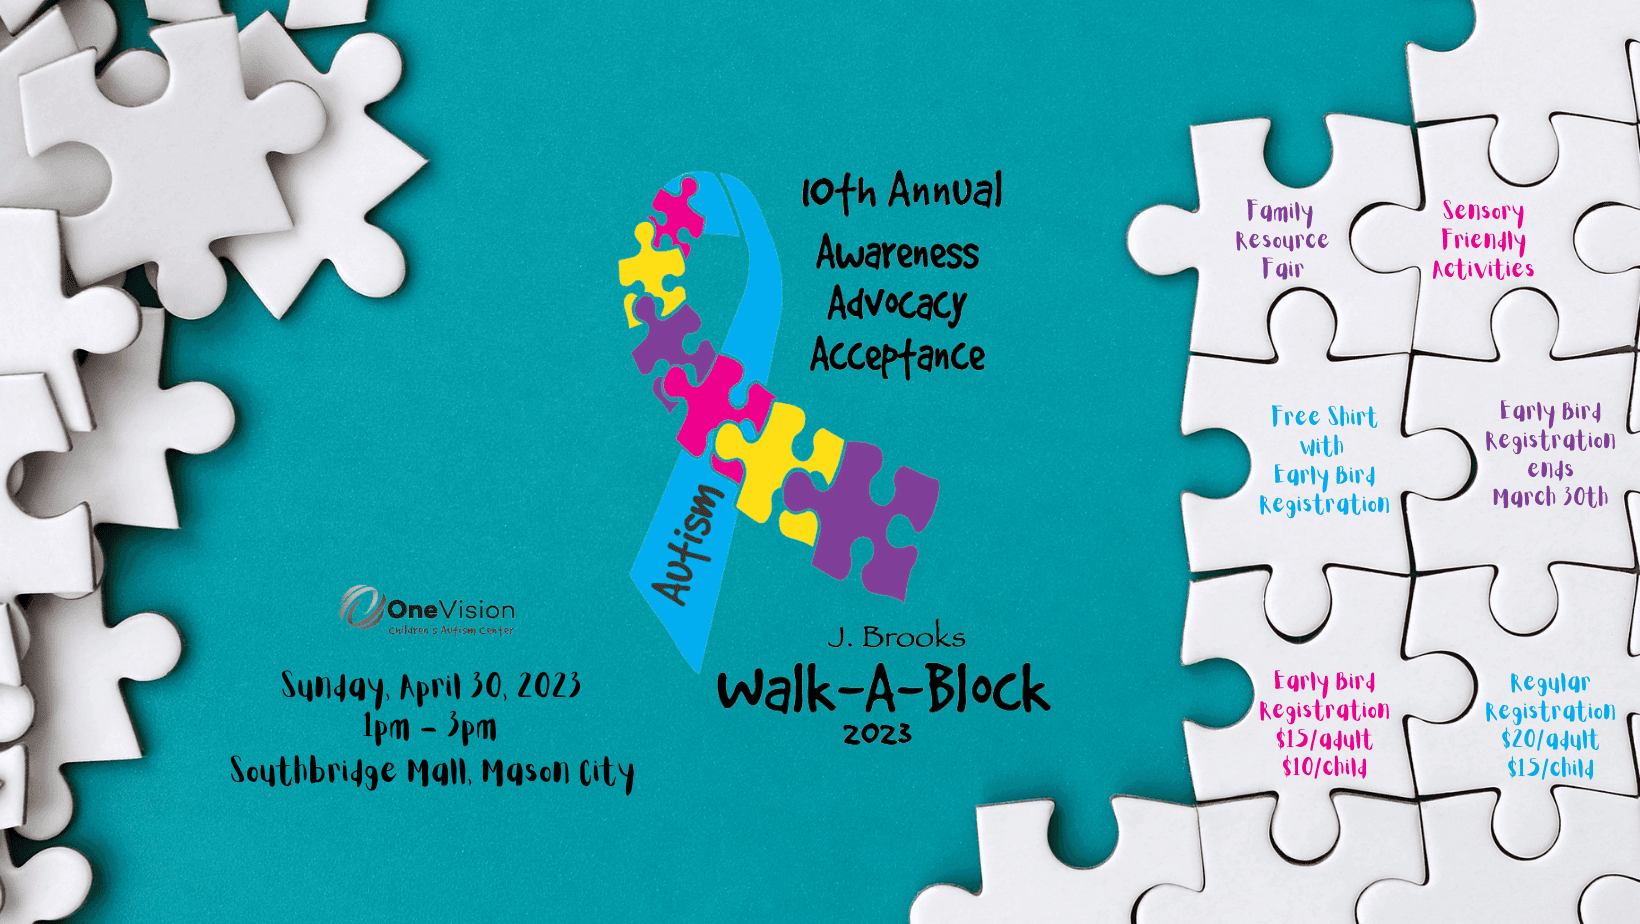 Registration for the 10th Annual J. Brooks Walk-A-Block for Autism Awareness is Now Open!